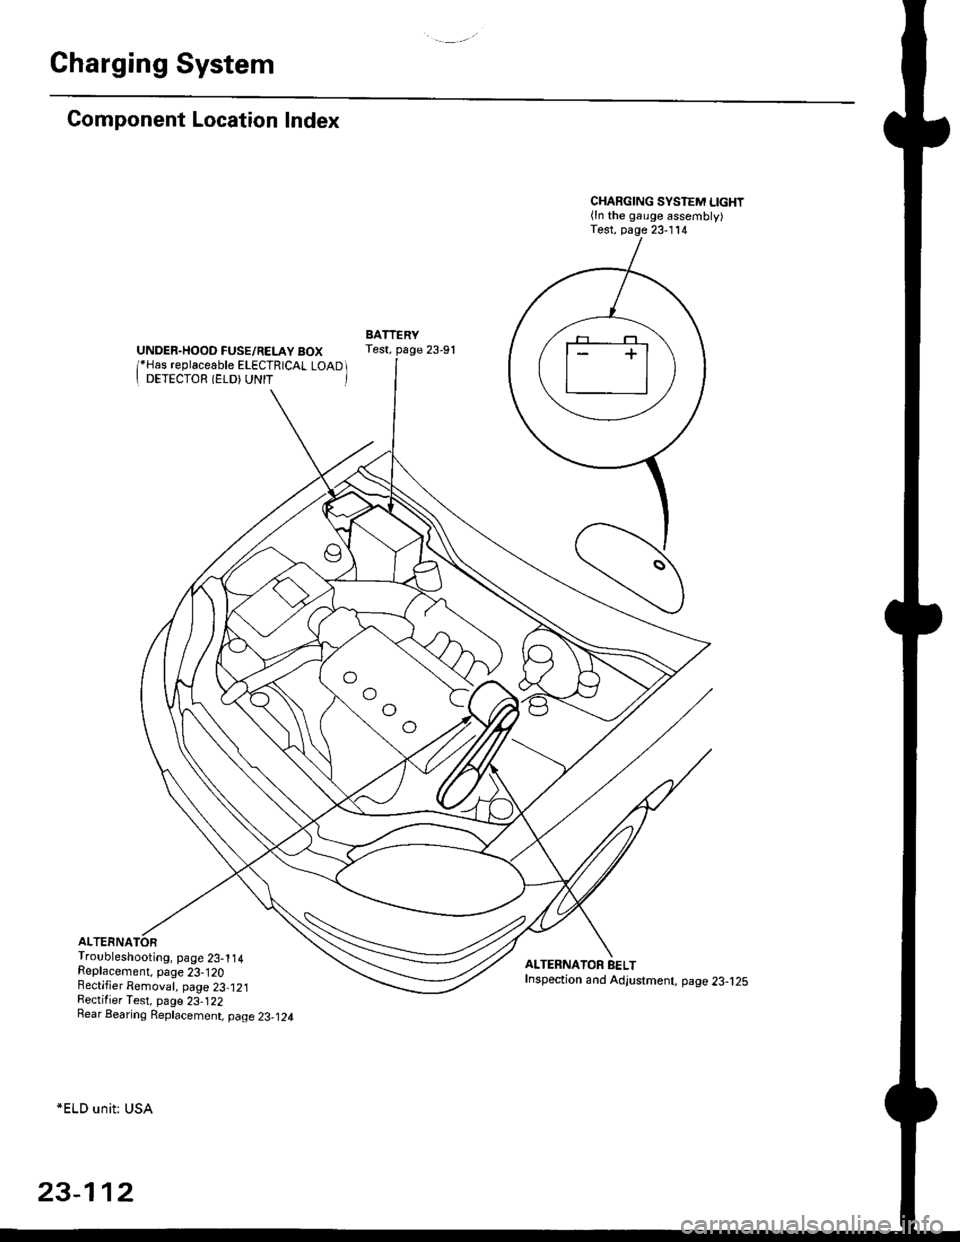 HONDA CIVIC 1996 6.G Workshop Manual Charging System
Component Location Index
UNDER.HOOD FUSE/RELAY BOX/*Has replaceable ELECTRICAL LOAD II DETECTOR (ELD) UNIT 
Troubleshooting, page 23-1 14Replacement, page 23-120Bectifier Removal, pag